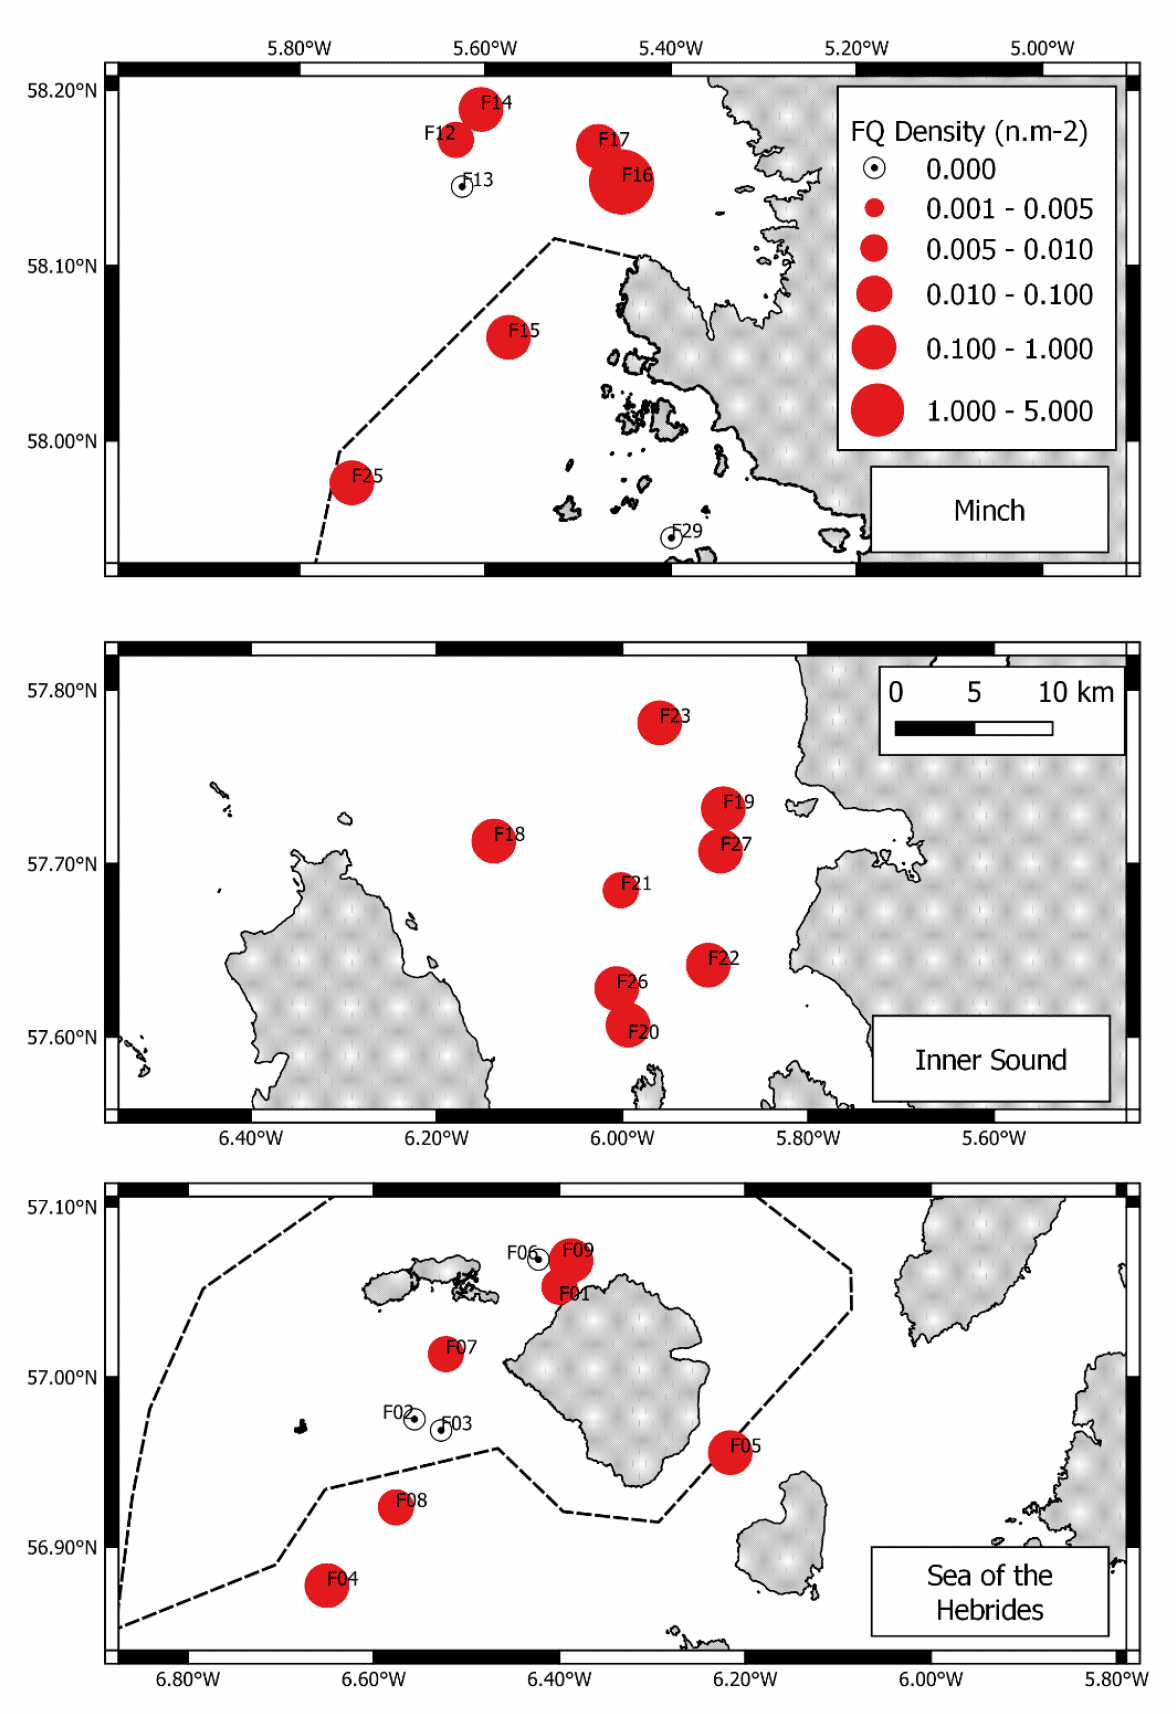 The density of Funiculia quadrangularis varies across survey locations in the Minch to the North, Inner Sound, and Sea of Hebrides to the South. Funiculina quadrangularis was seen at all survey locations apart from one in the Minch and two in the Sea of Hebrides.